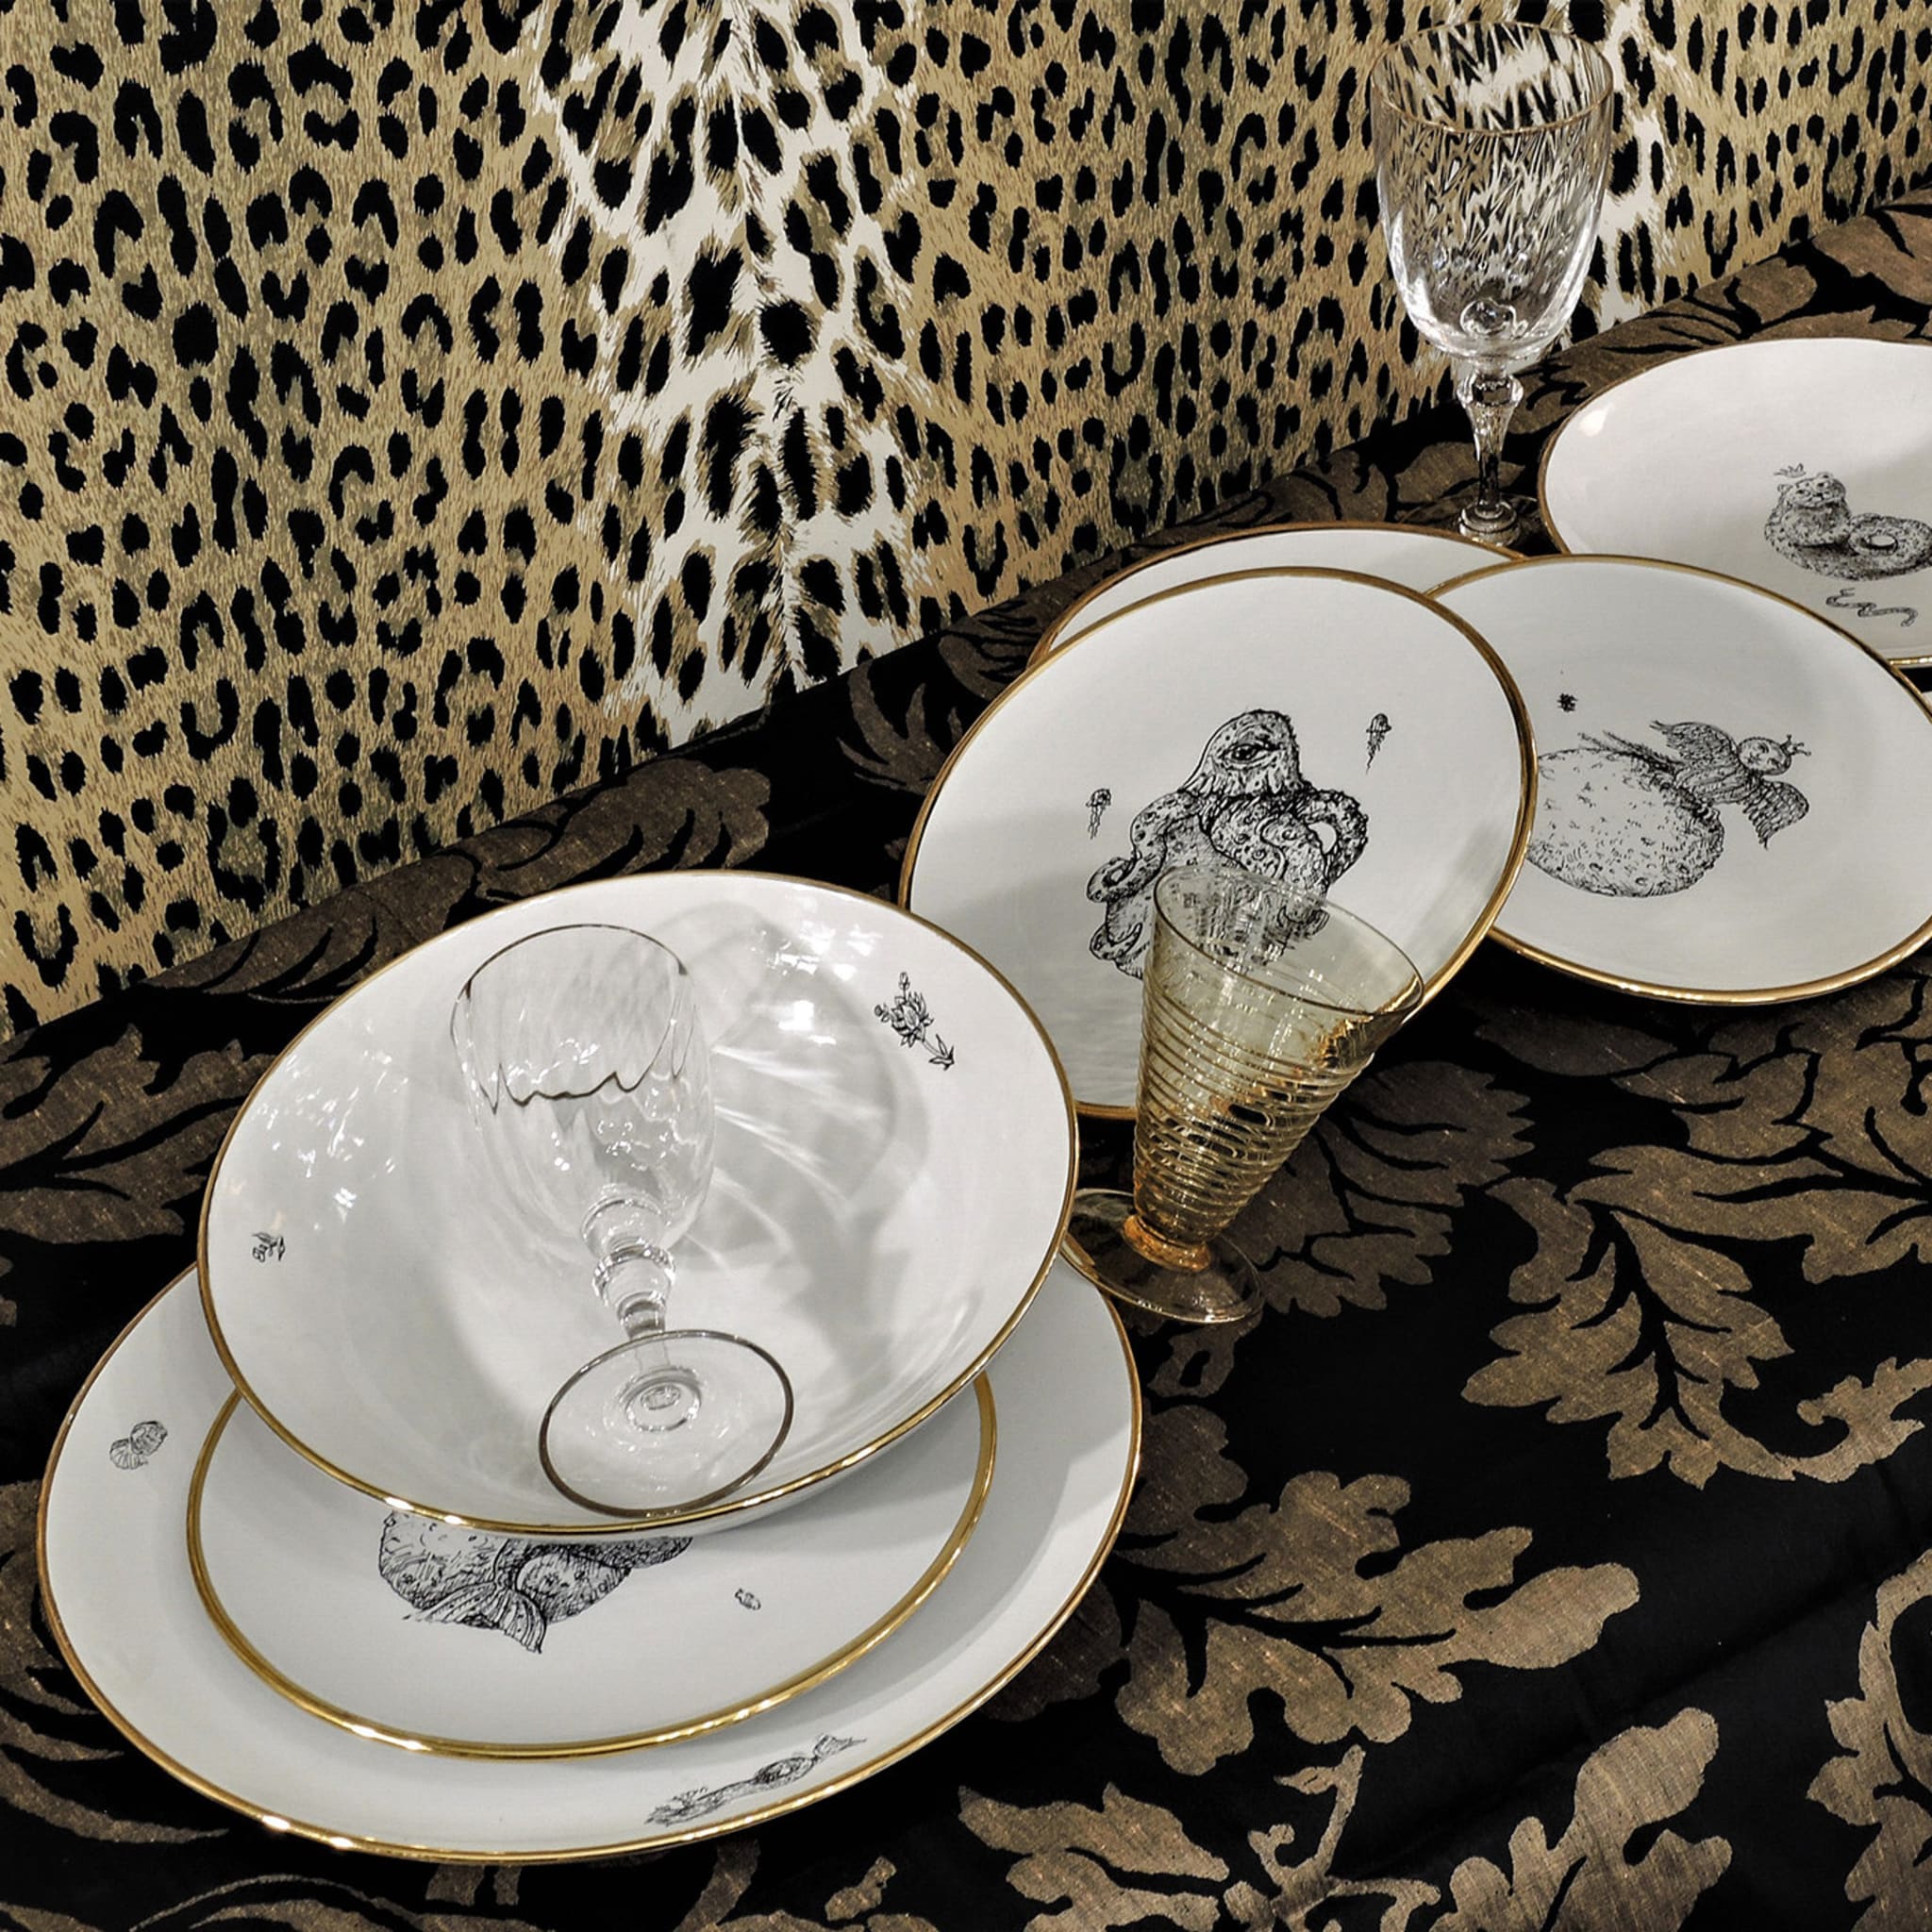 Panther Dinner Plate - Animalarium Collection - Alternative view 2